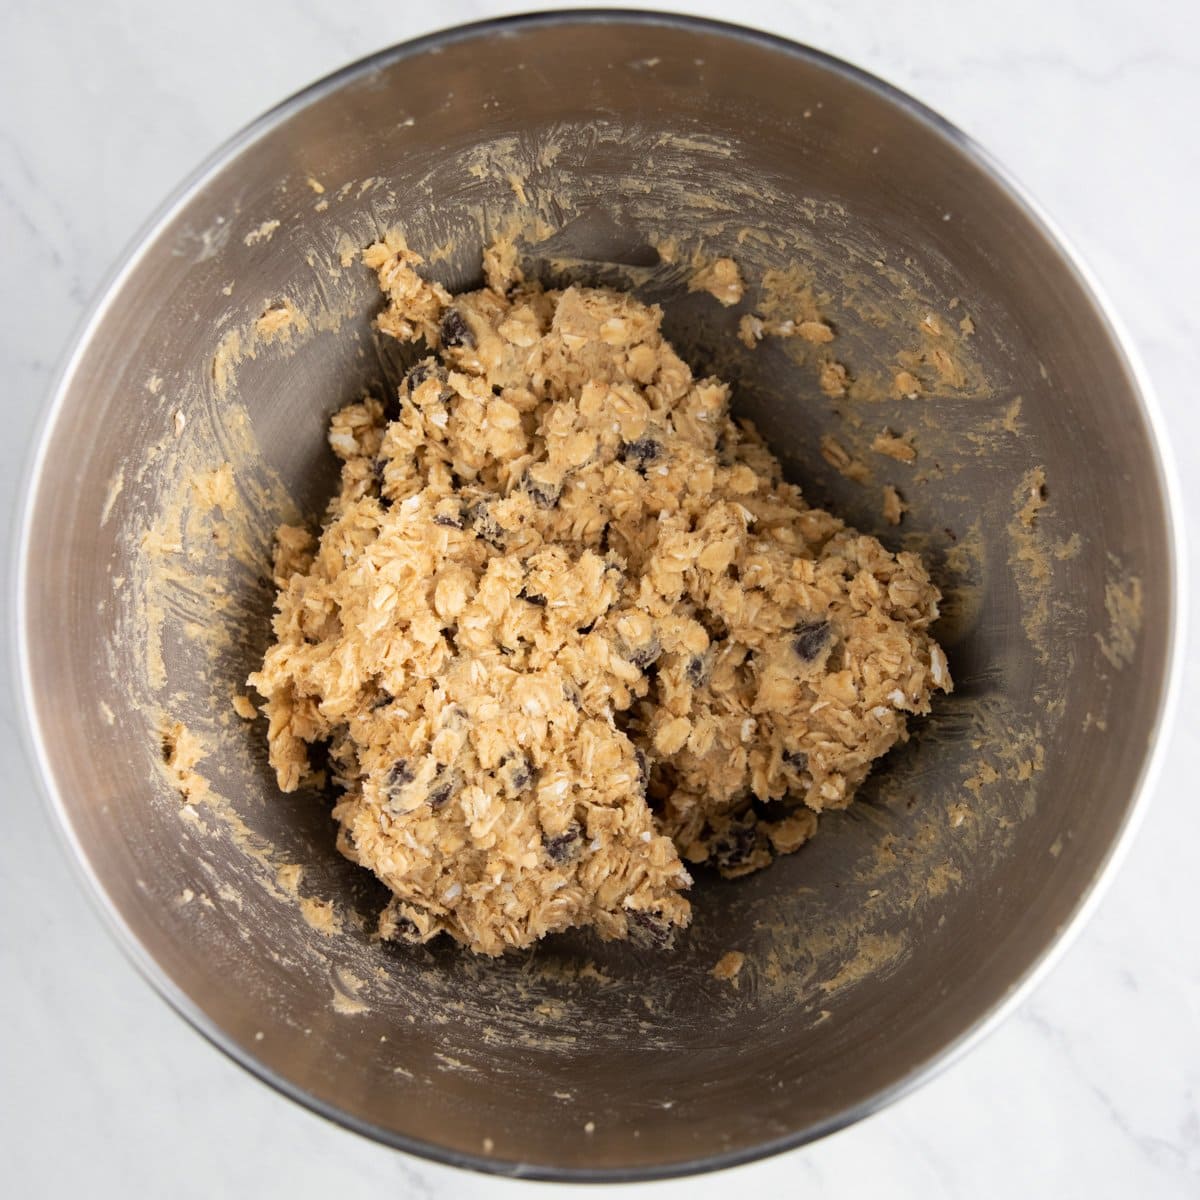 Rolled oats and dark chocolate chips are stirred into cookie dough.